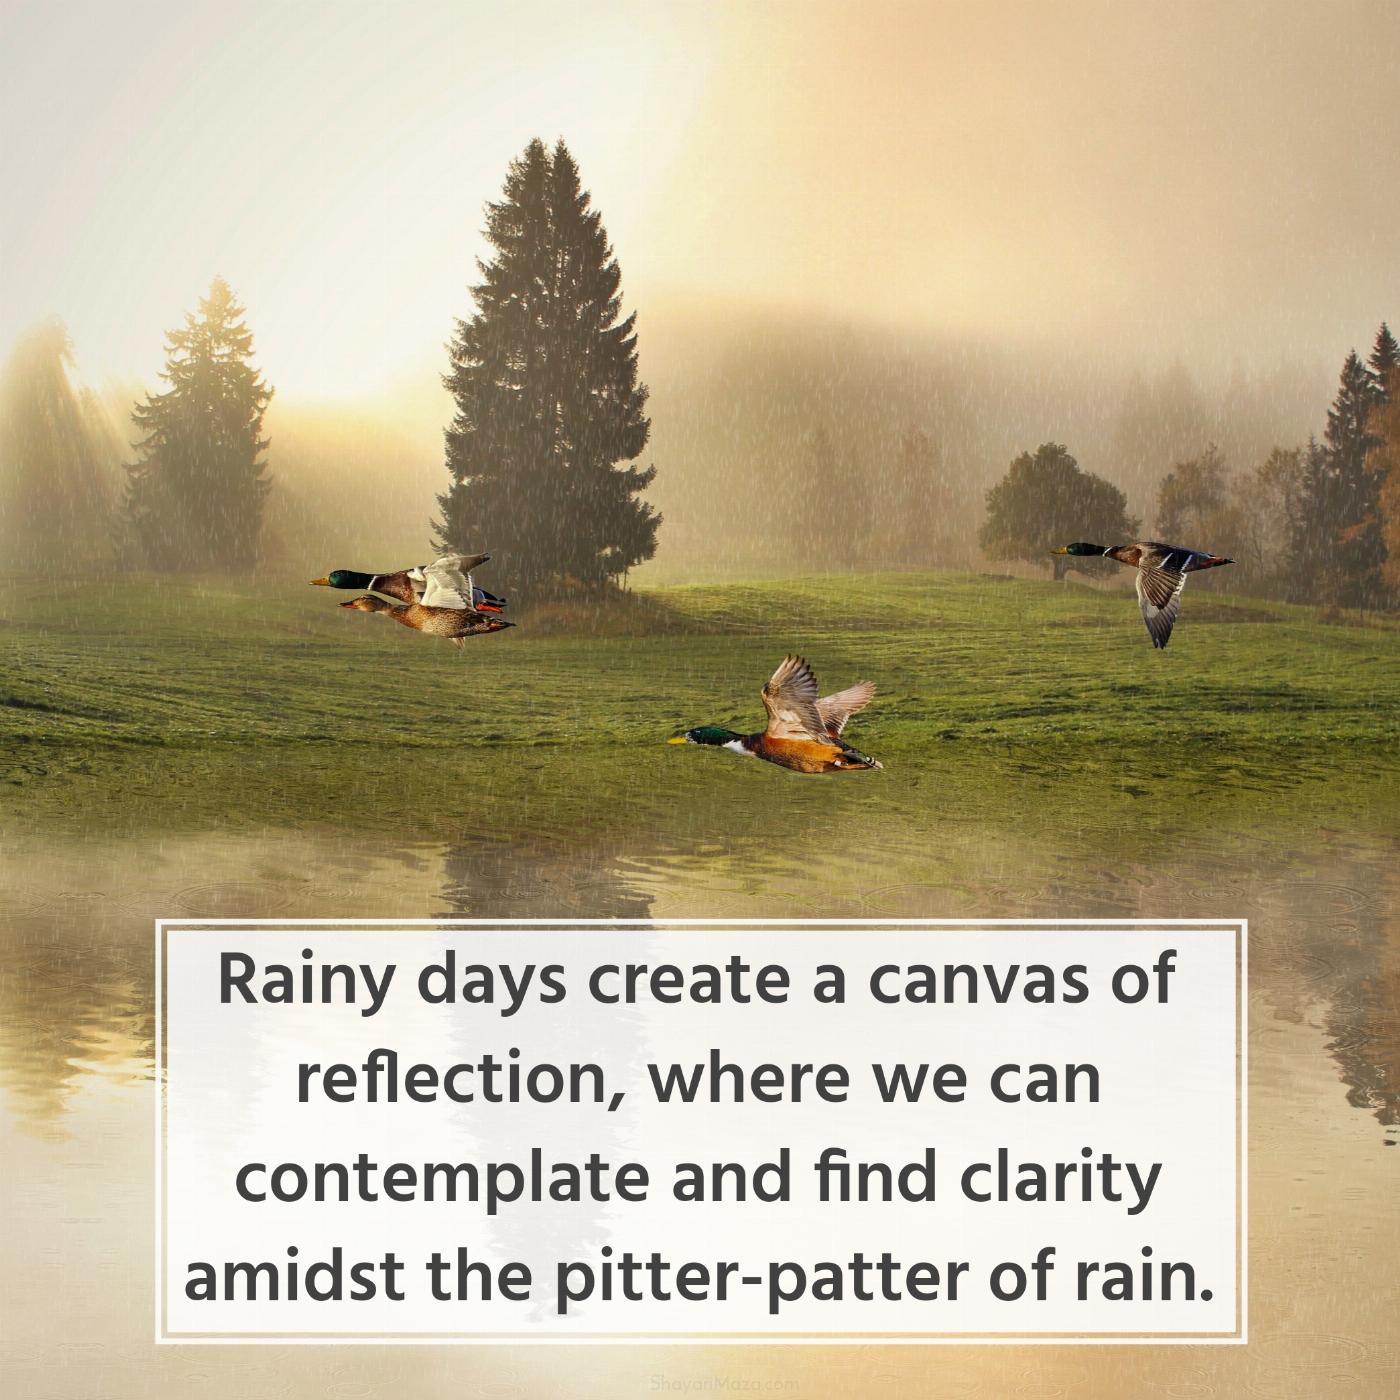 Rainy days create a canvas of reflection where we can contemplate